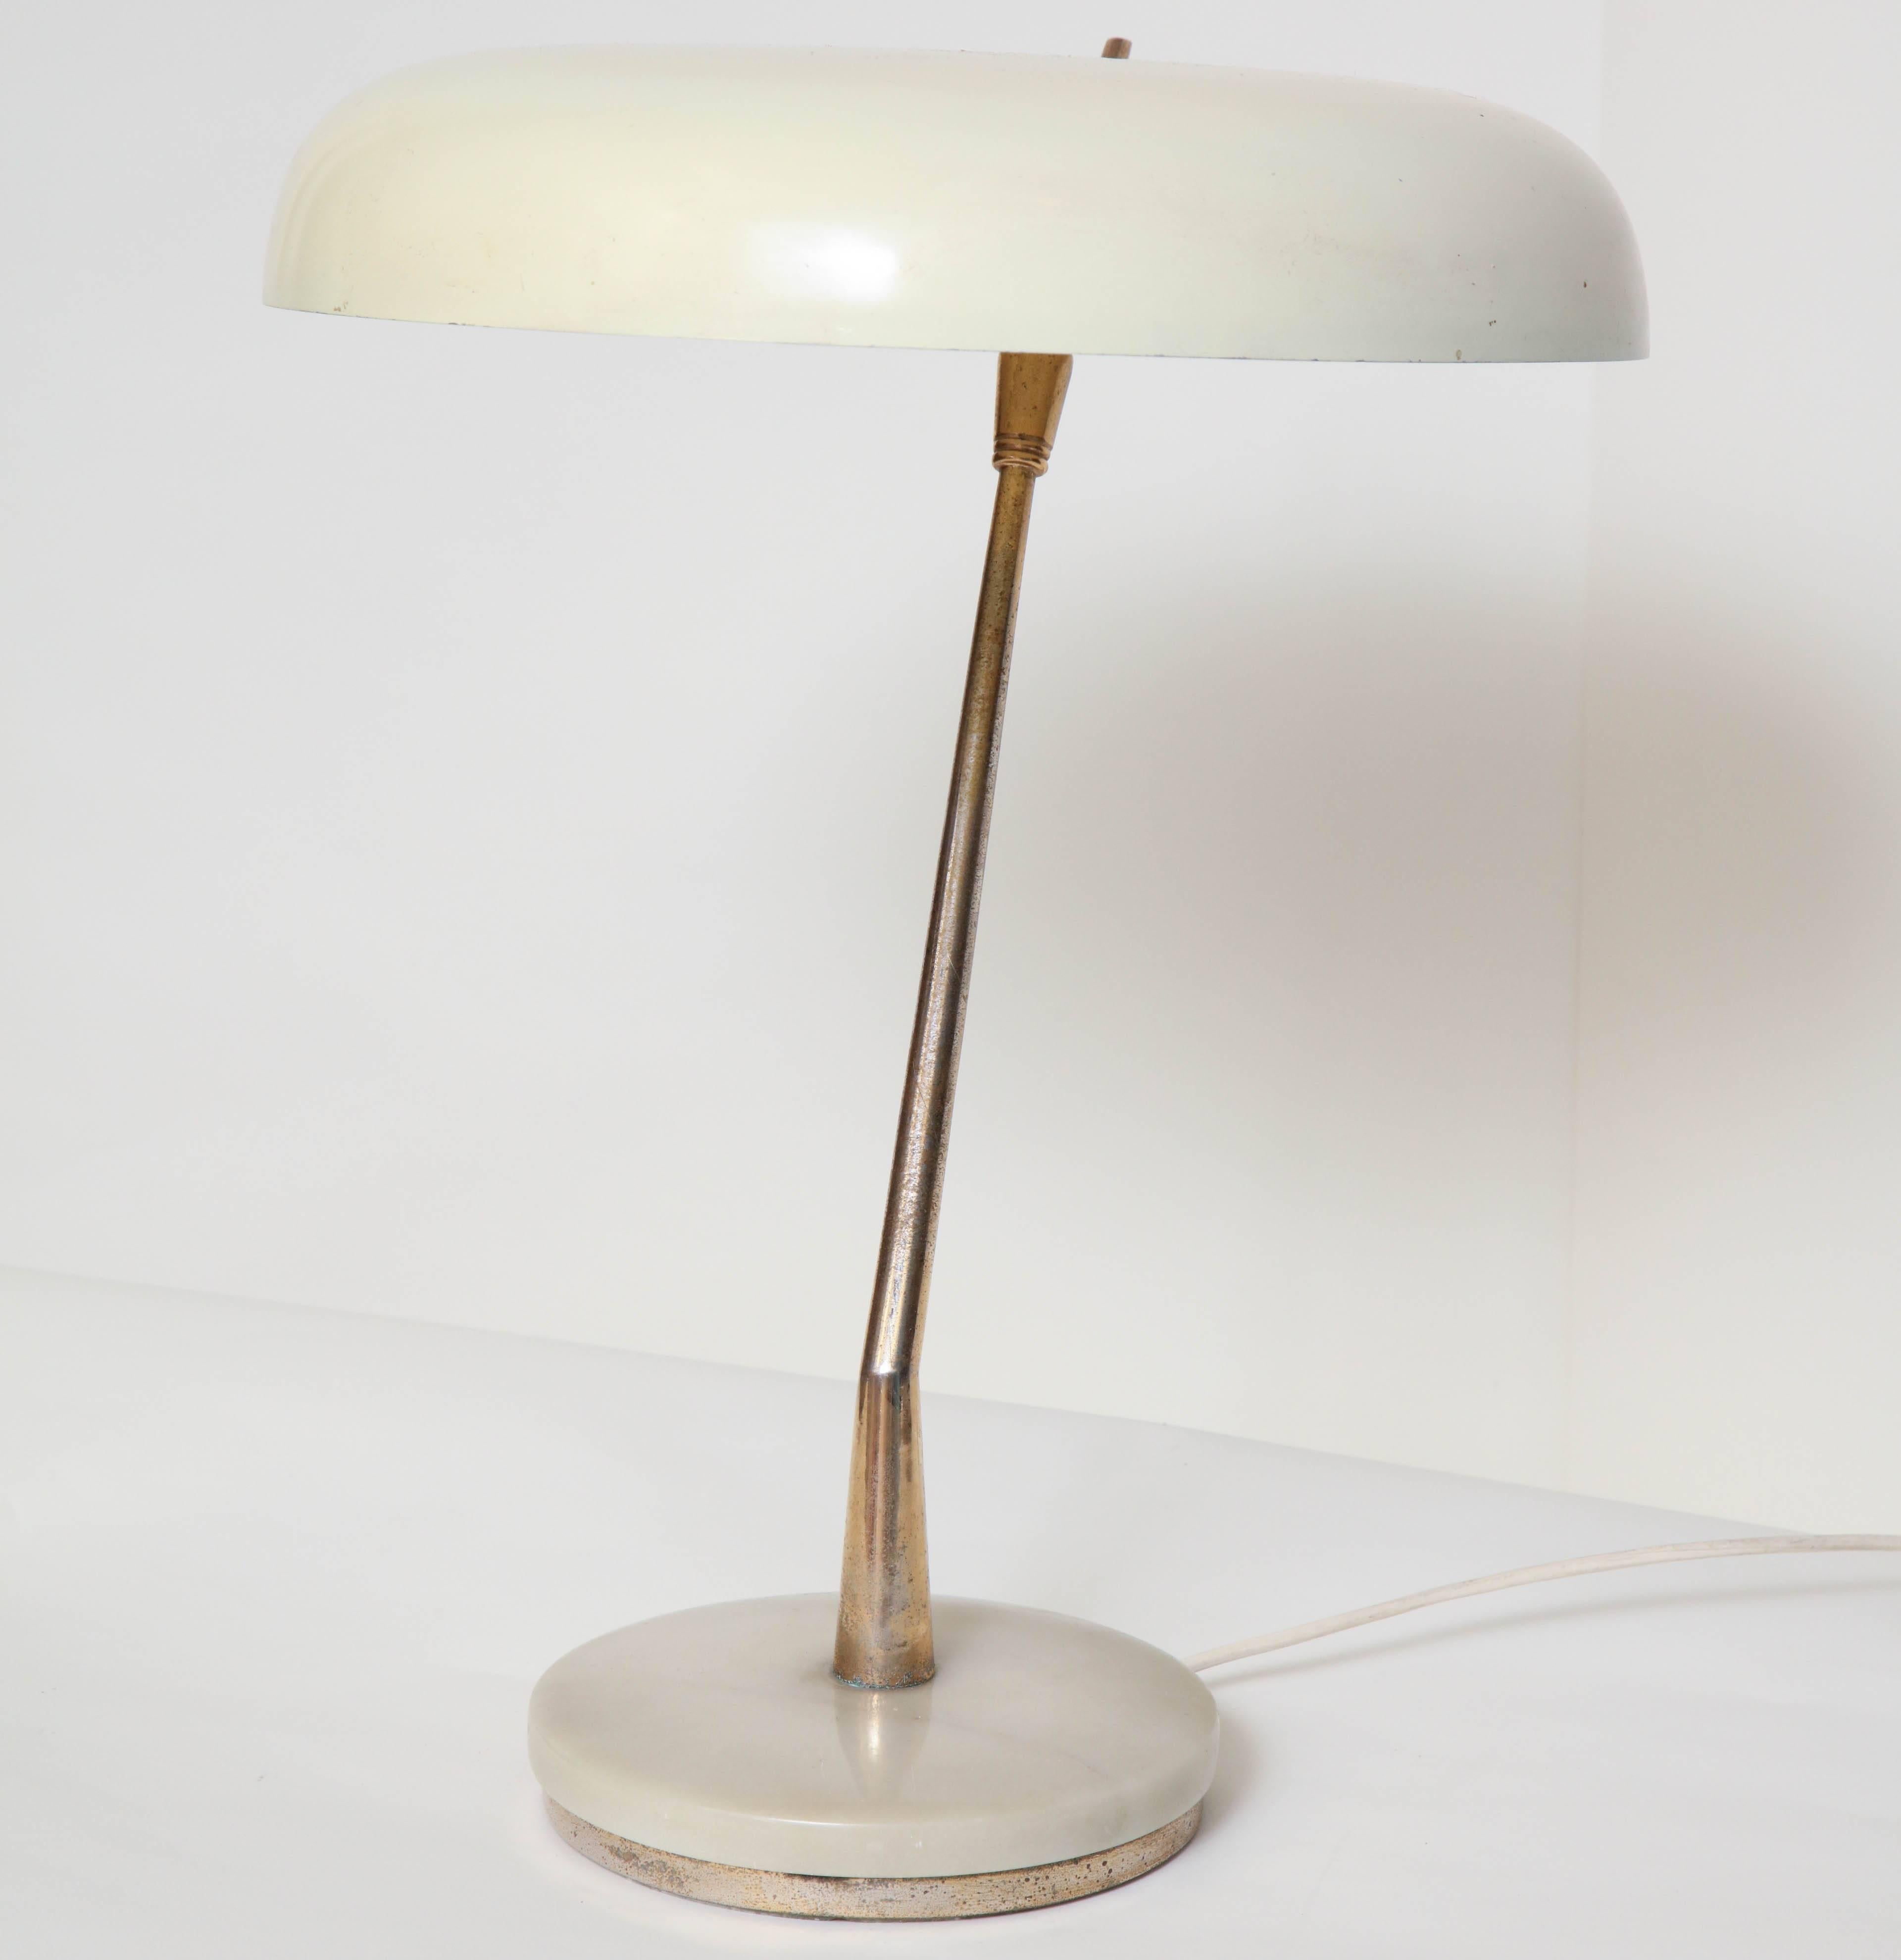 Articulated Table Lamp Attributed to Arredoluce Italian Mid-Century Modern, 1950 4